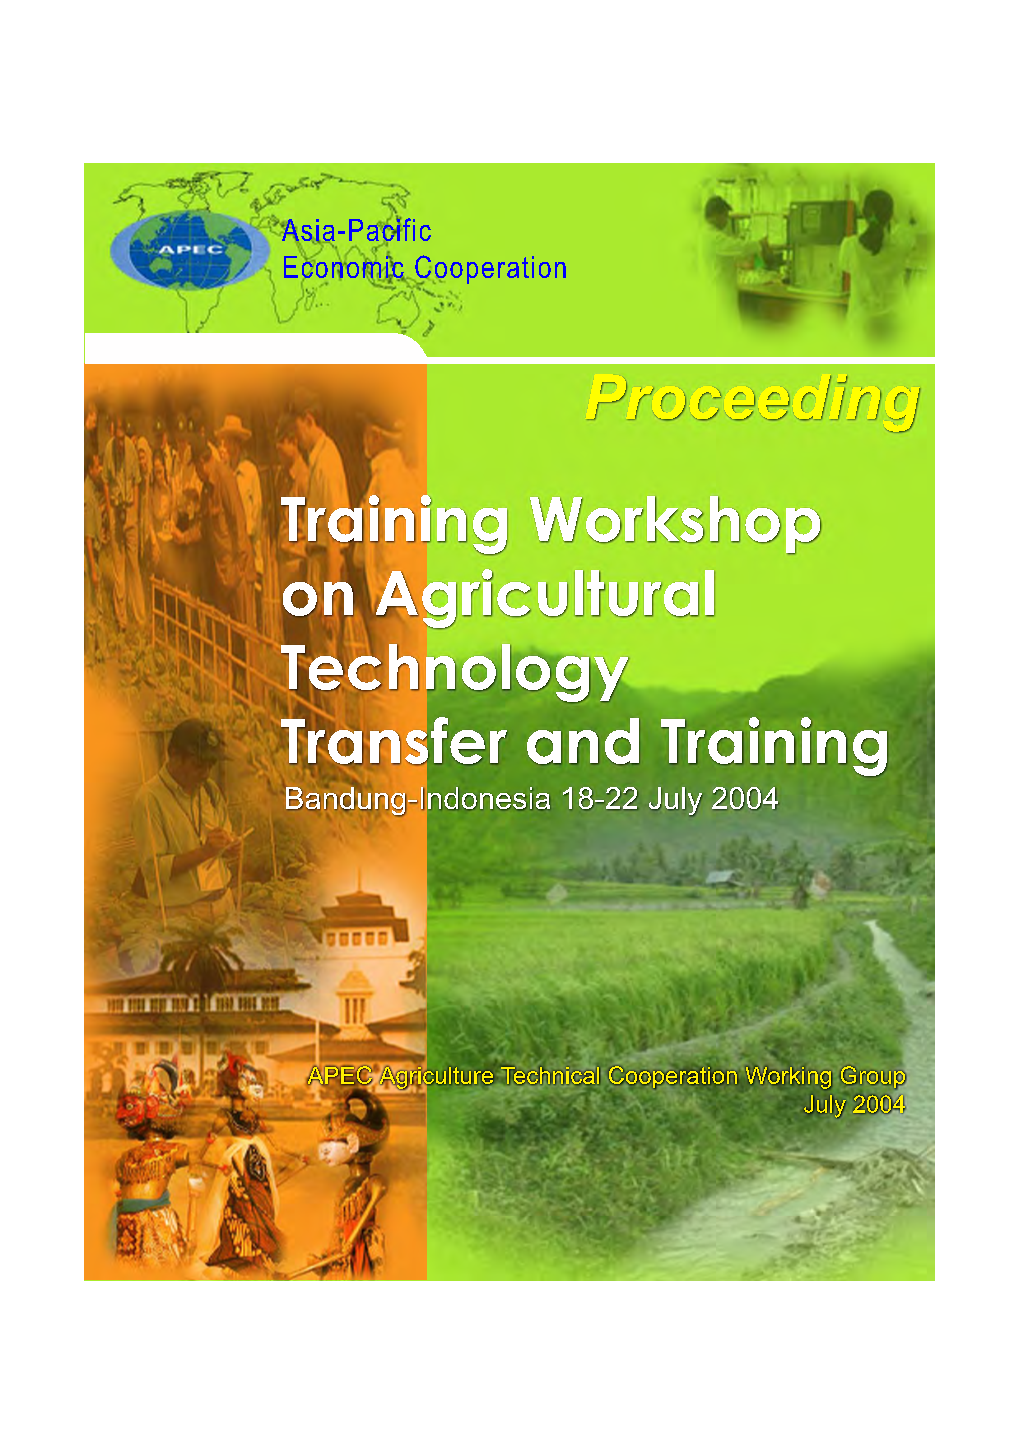 Training Workshop on Agricultural Technology Transfer and Training